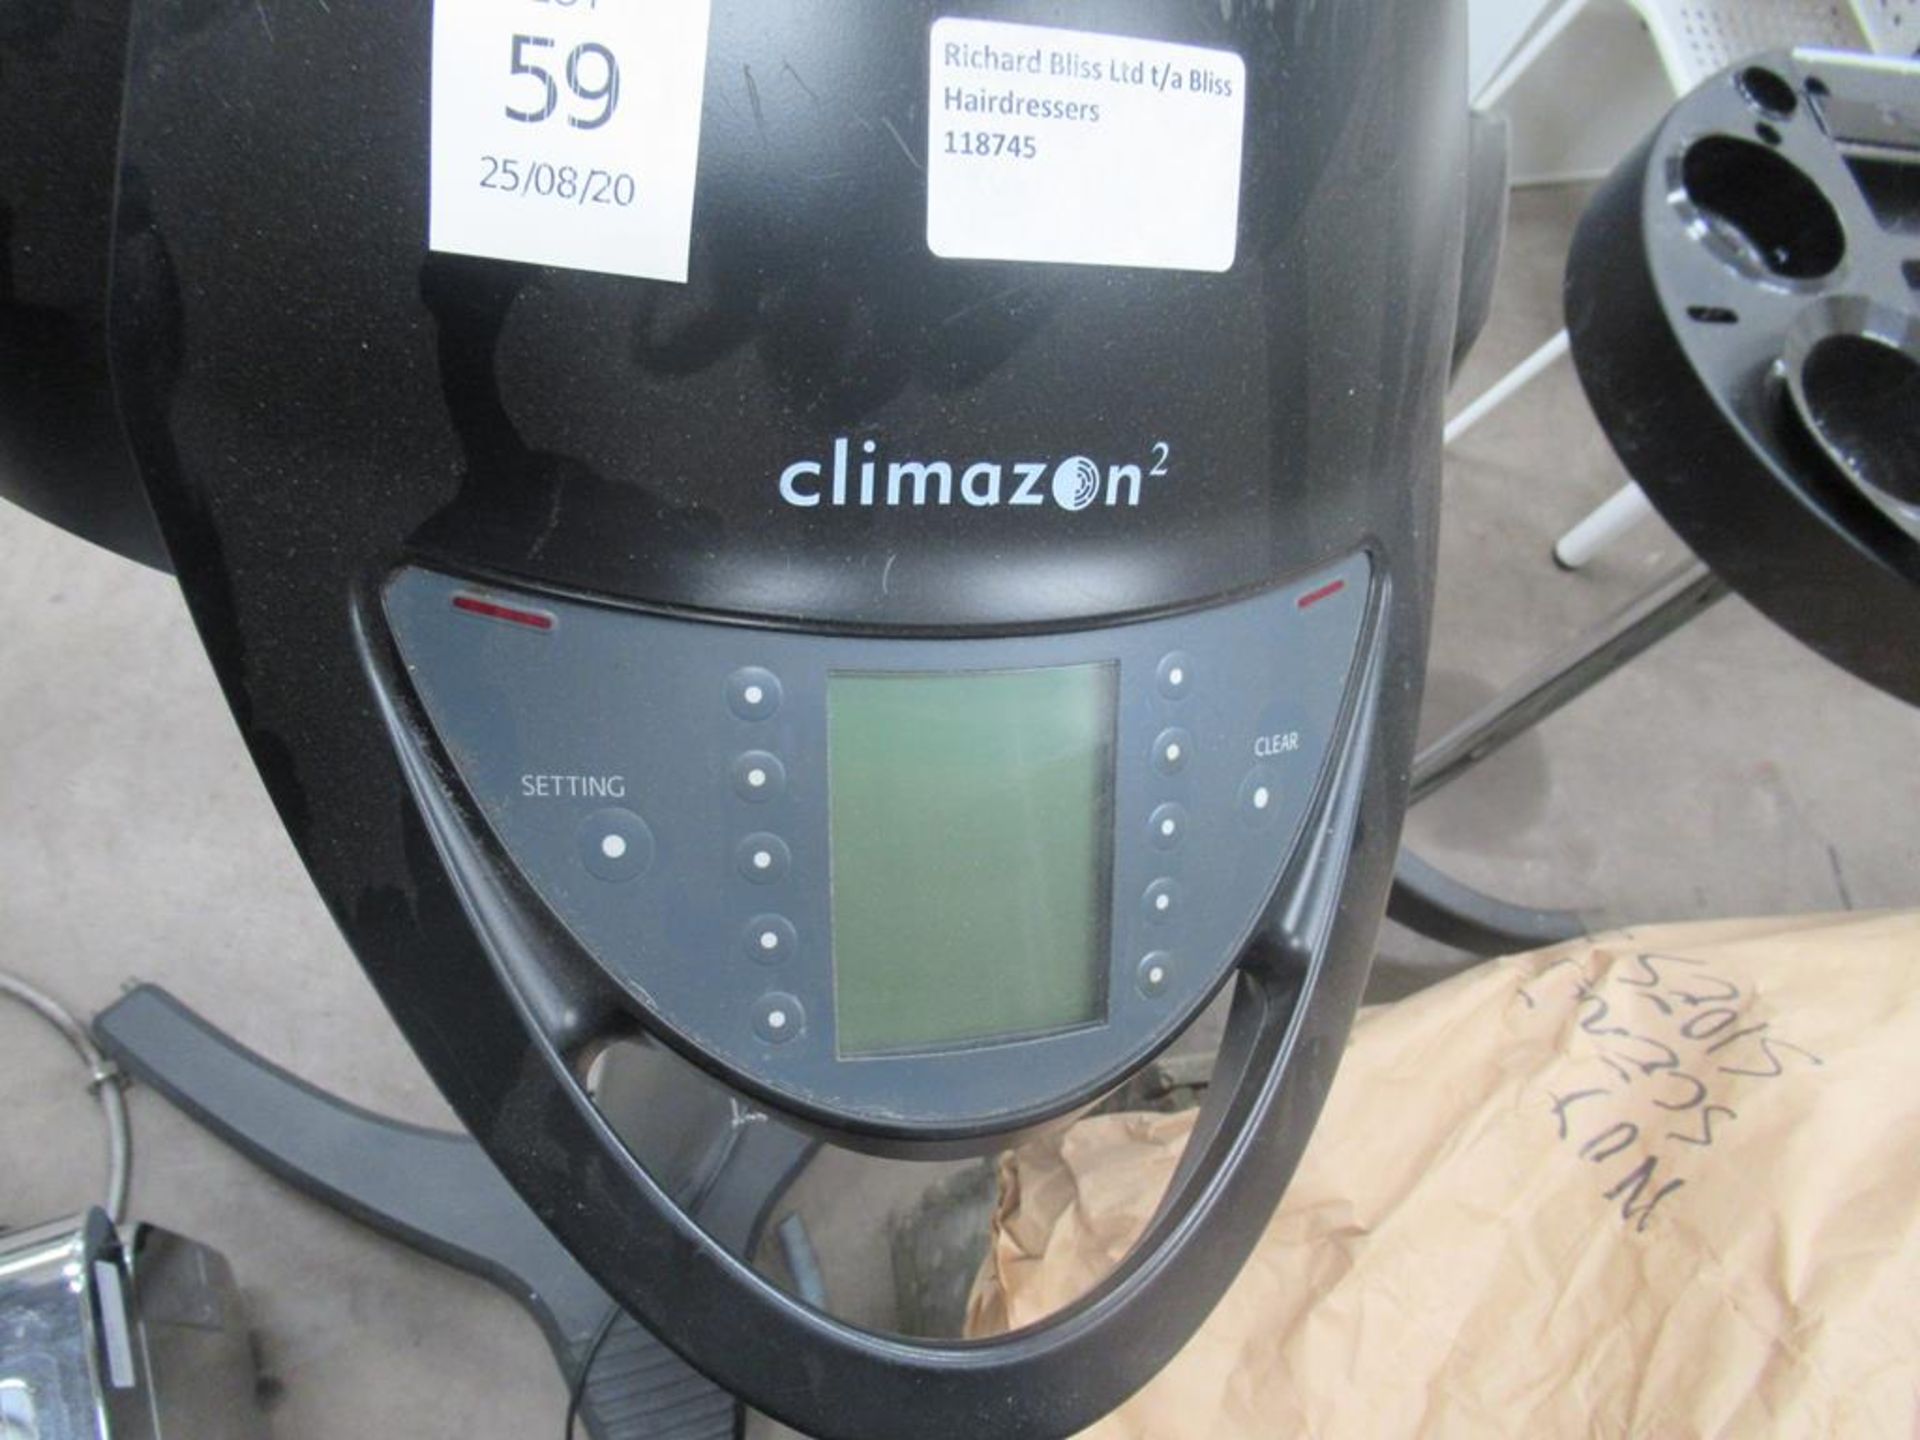 A Wella Climazon² hair dryer together with utility tray (no containers) - Image 4 of 7